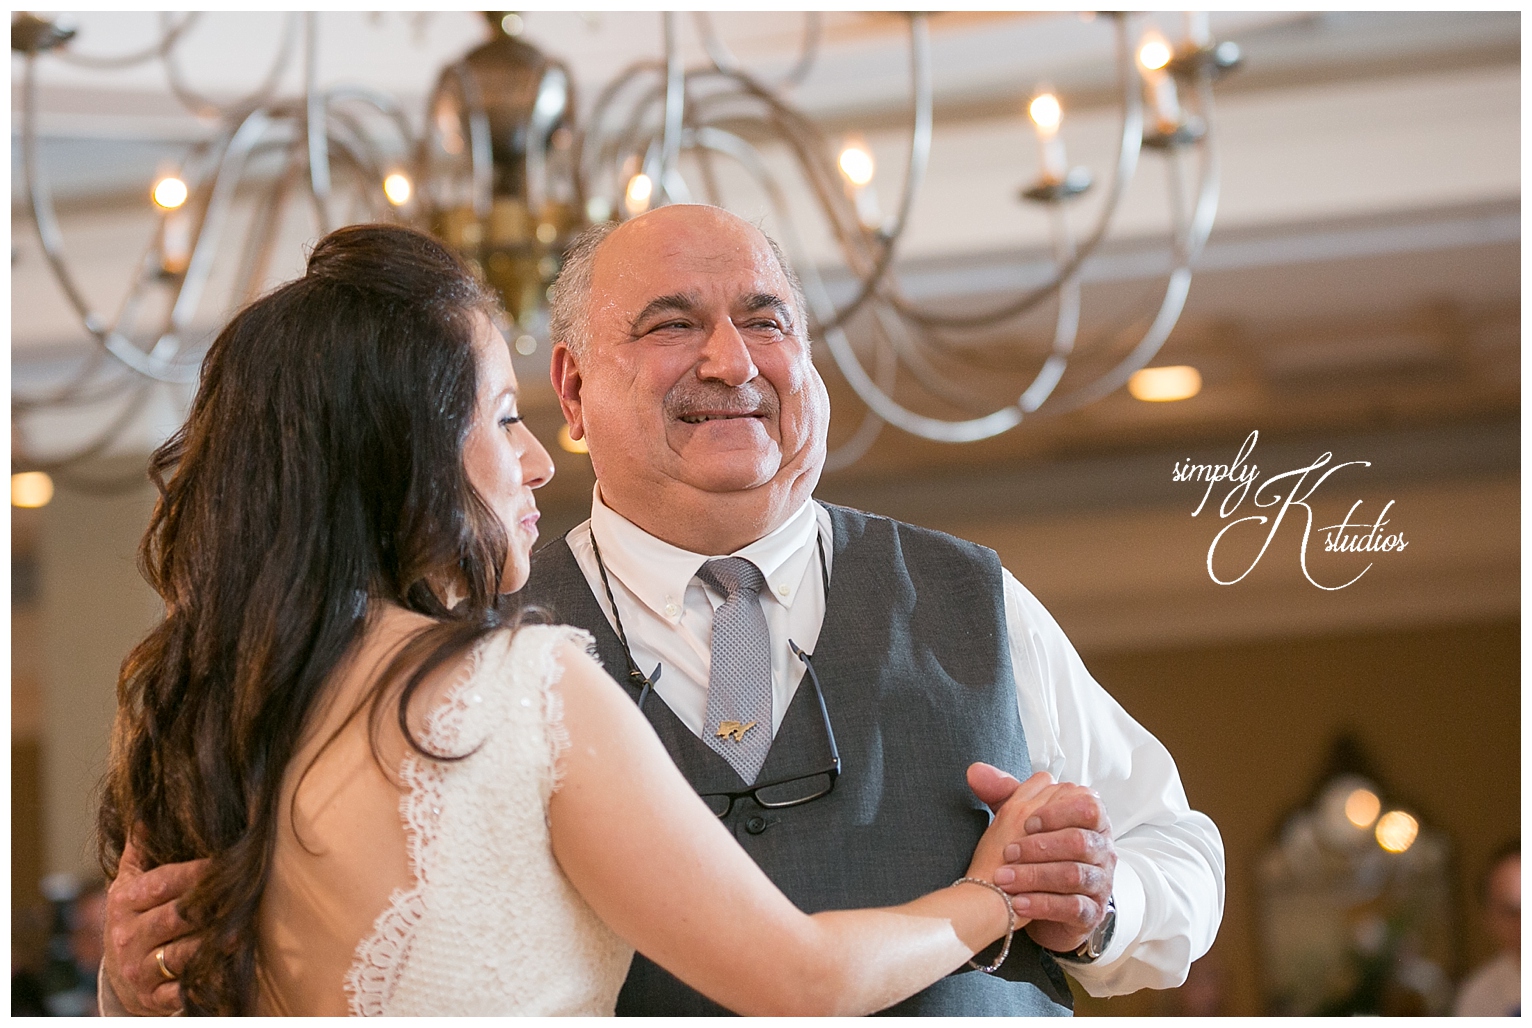 Father Daughter Dance at a Wedding.jpg